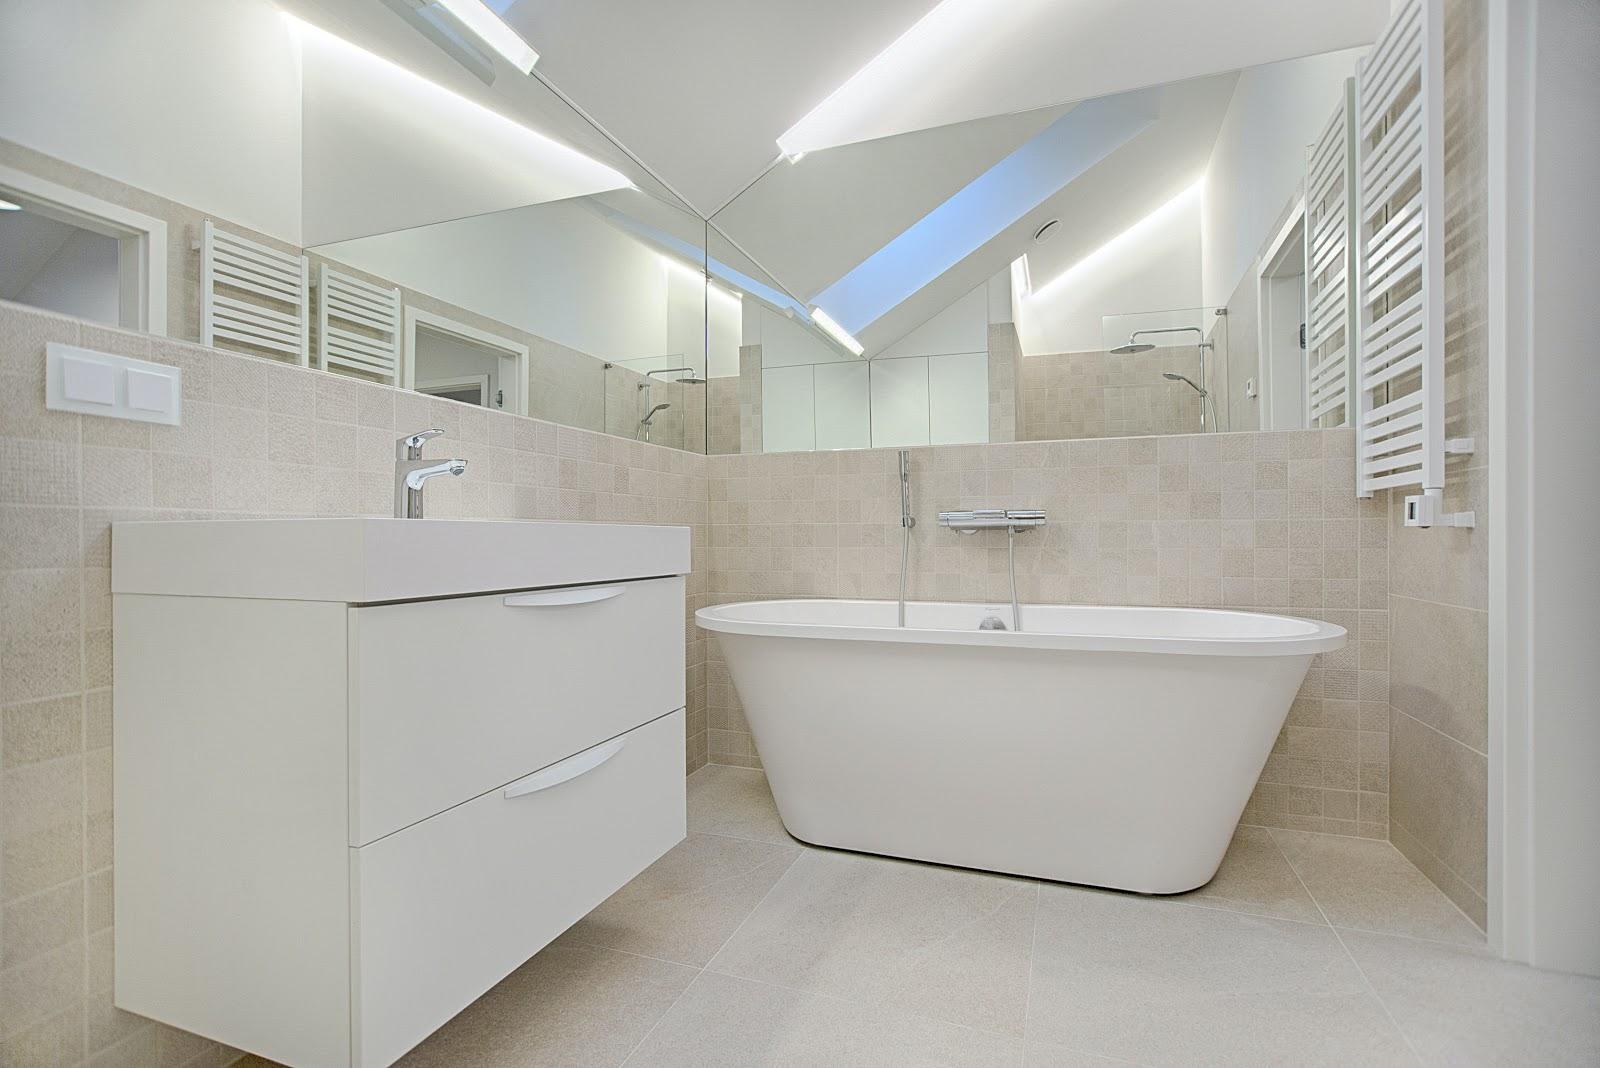 6 DIY Tips To Remodel Your Bathroom